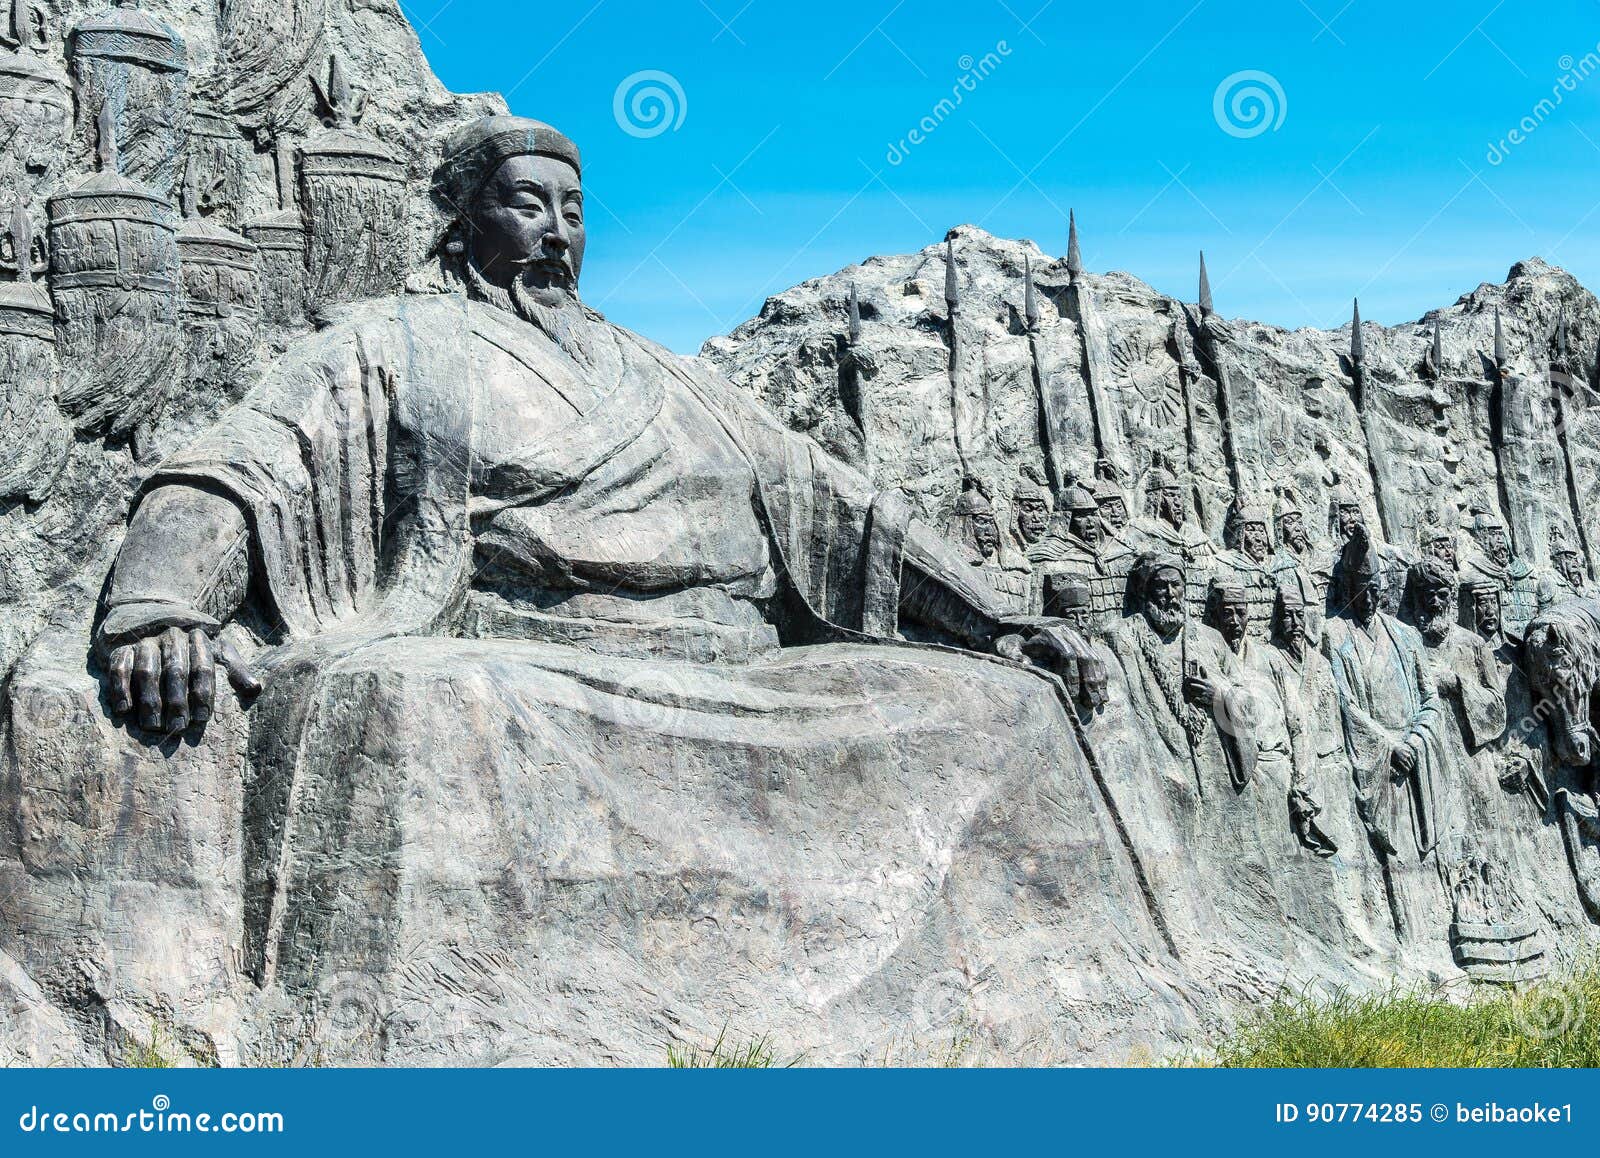 kublai khan statue at site of xanadu (world heritage site). a famous historic site in zhenglan banner, xilin gol, inner